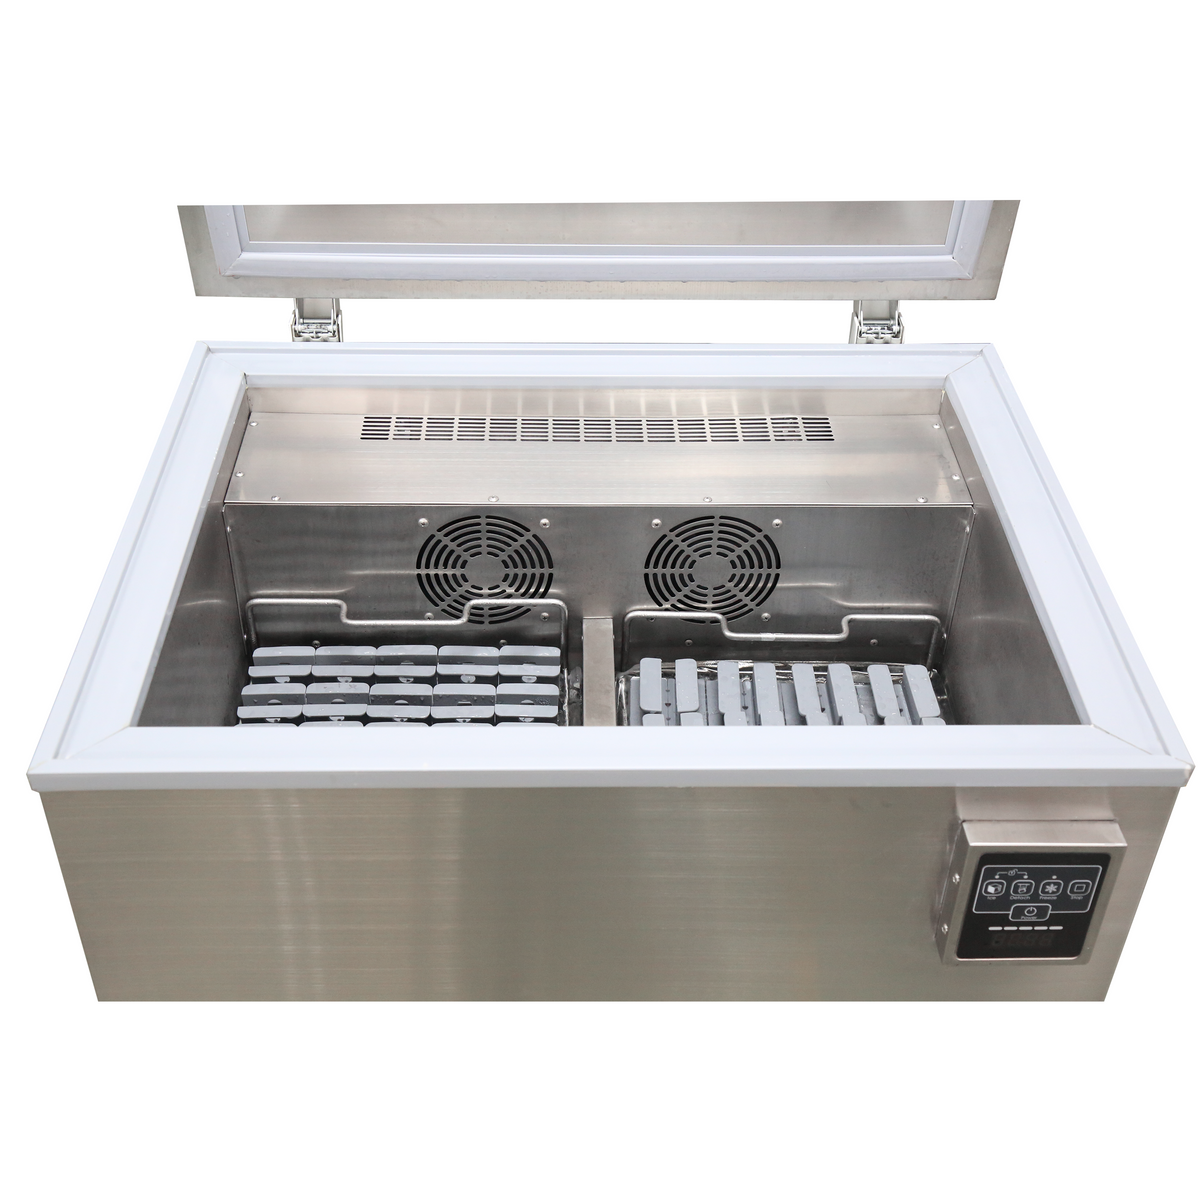 A picture inside the IMT300 Skyra double tray clear ice maker.